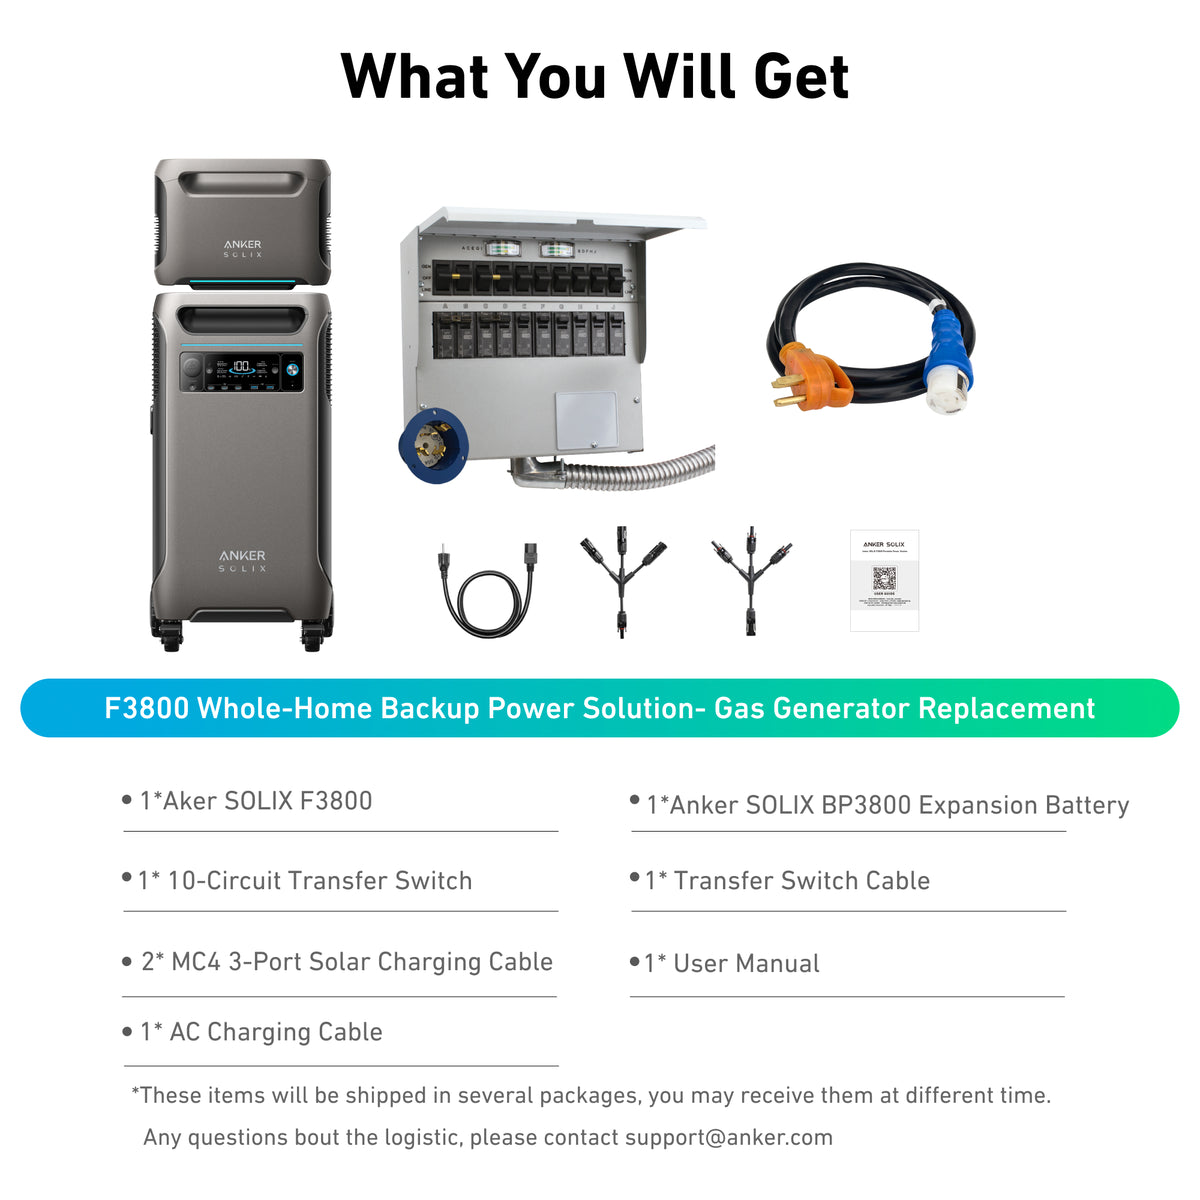 Anker SOLIX F3800 and BP3800 Expansion Battery Transfer Switch Kit